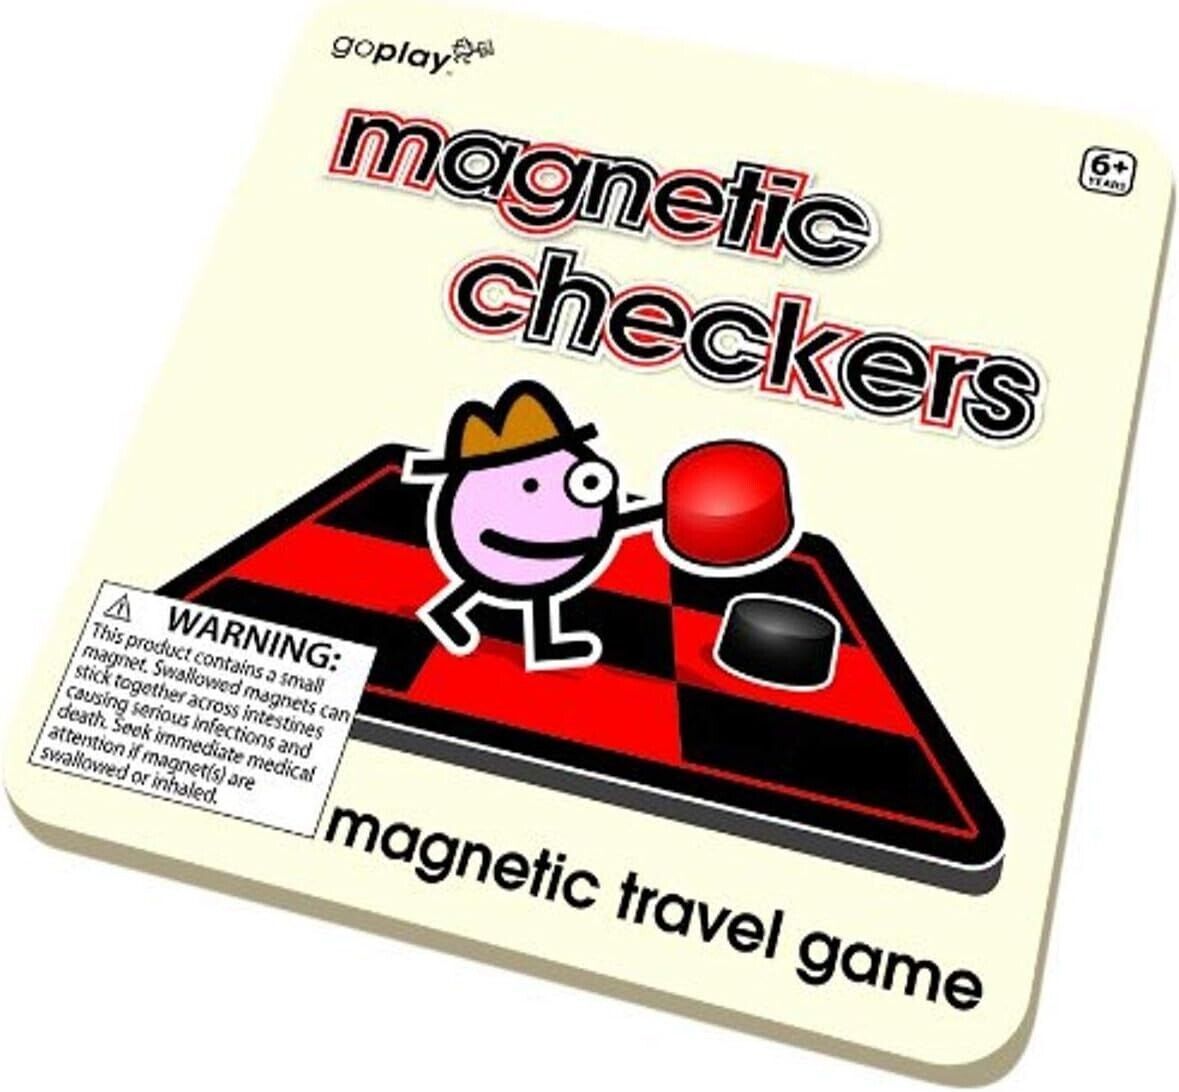 Magnetic Checkers Travel Game - Great Table or Travel Game for Hours of Fun! - $8.91